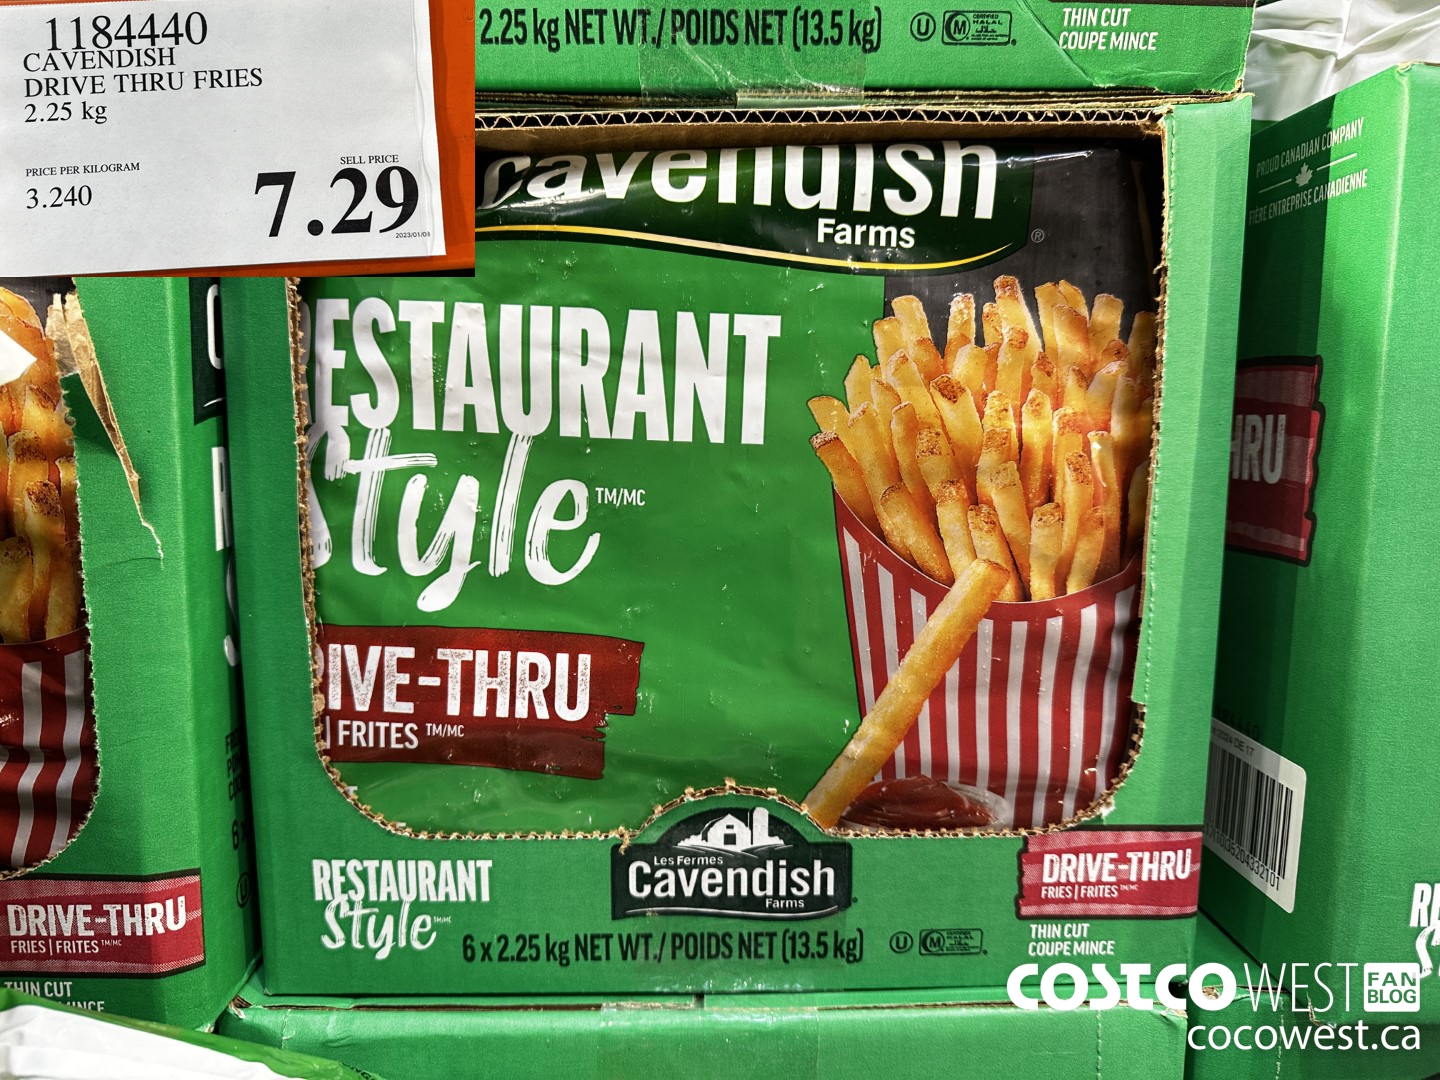 Costco Cavendish Restaurant Style Drive-Thru Fries Review